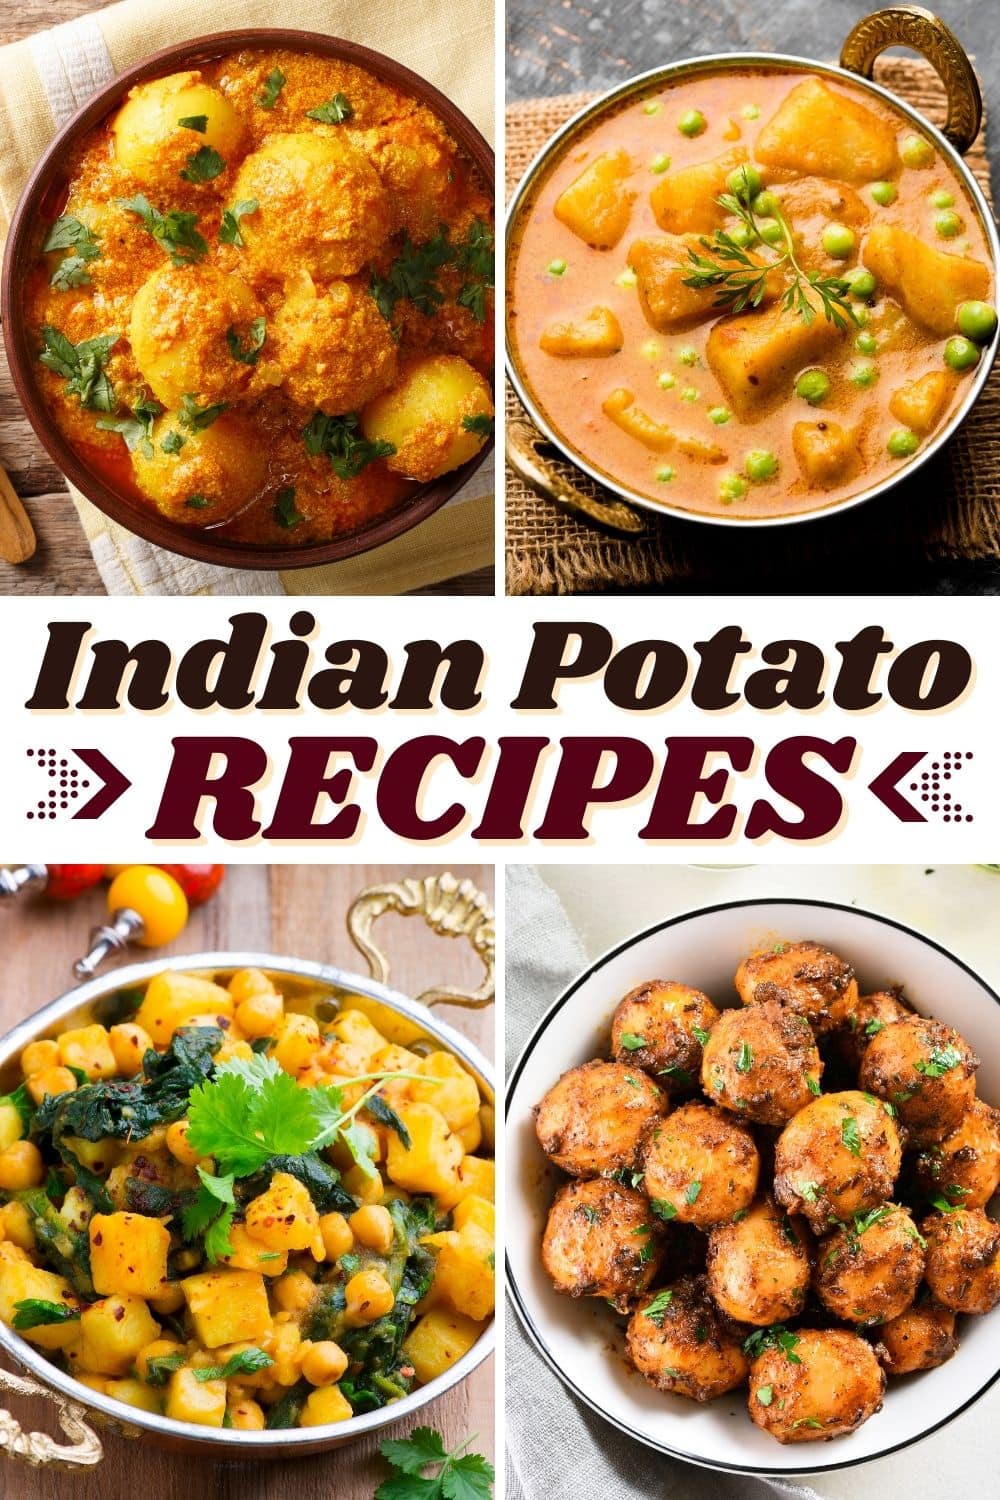 25 Best Indian Potato Recipes for Dinner - Insanely Good